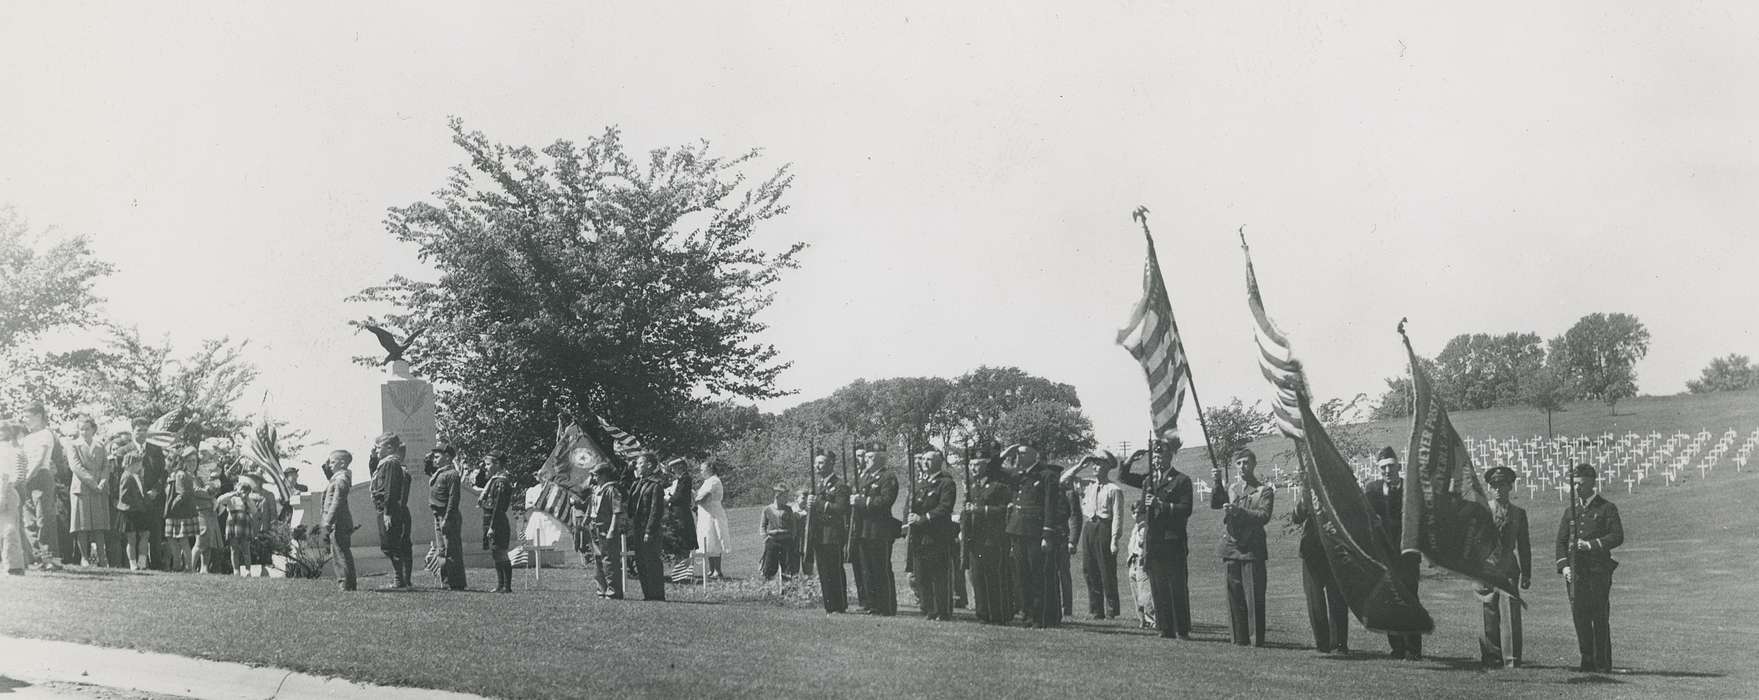 Military and Veterans, Waverly Public Library, Cemeteries and Funerals, color guard, tombstone, tree, Iowa, Iowa History, american flag, soldier, memorial day, Waverly, IA, history of Iowa, salute, harlington